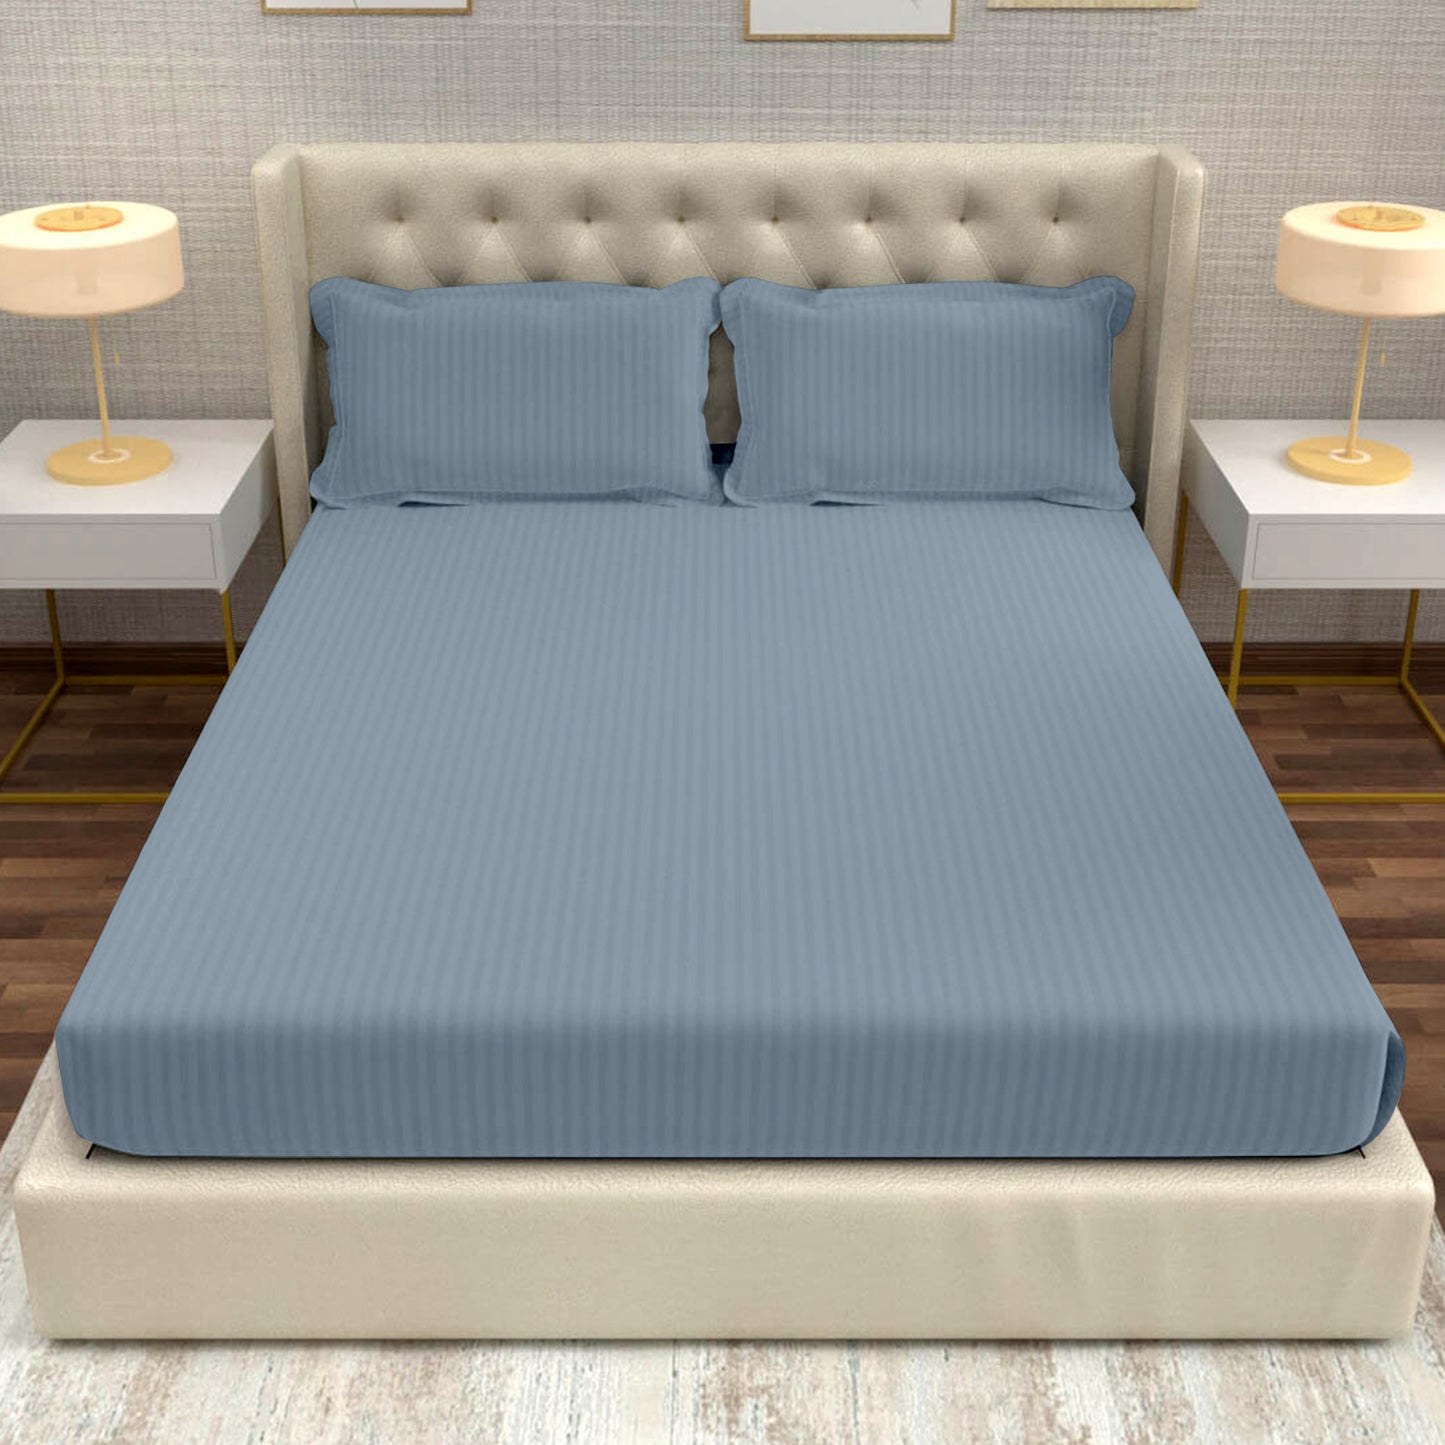 JEAN BLUE 100% Cotton 220 TC Italian Stripes Flat King Size Bedsheet With 2 Pillow Cover For Bedroom